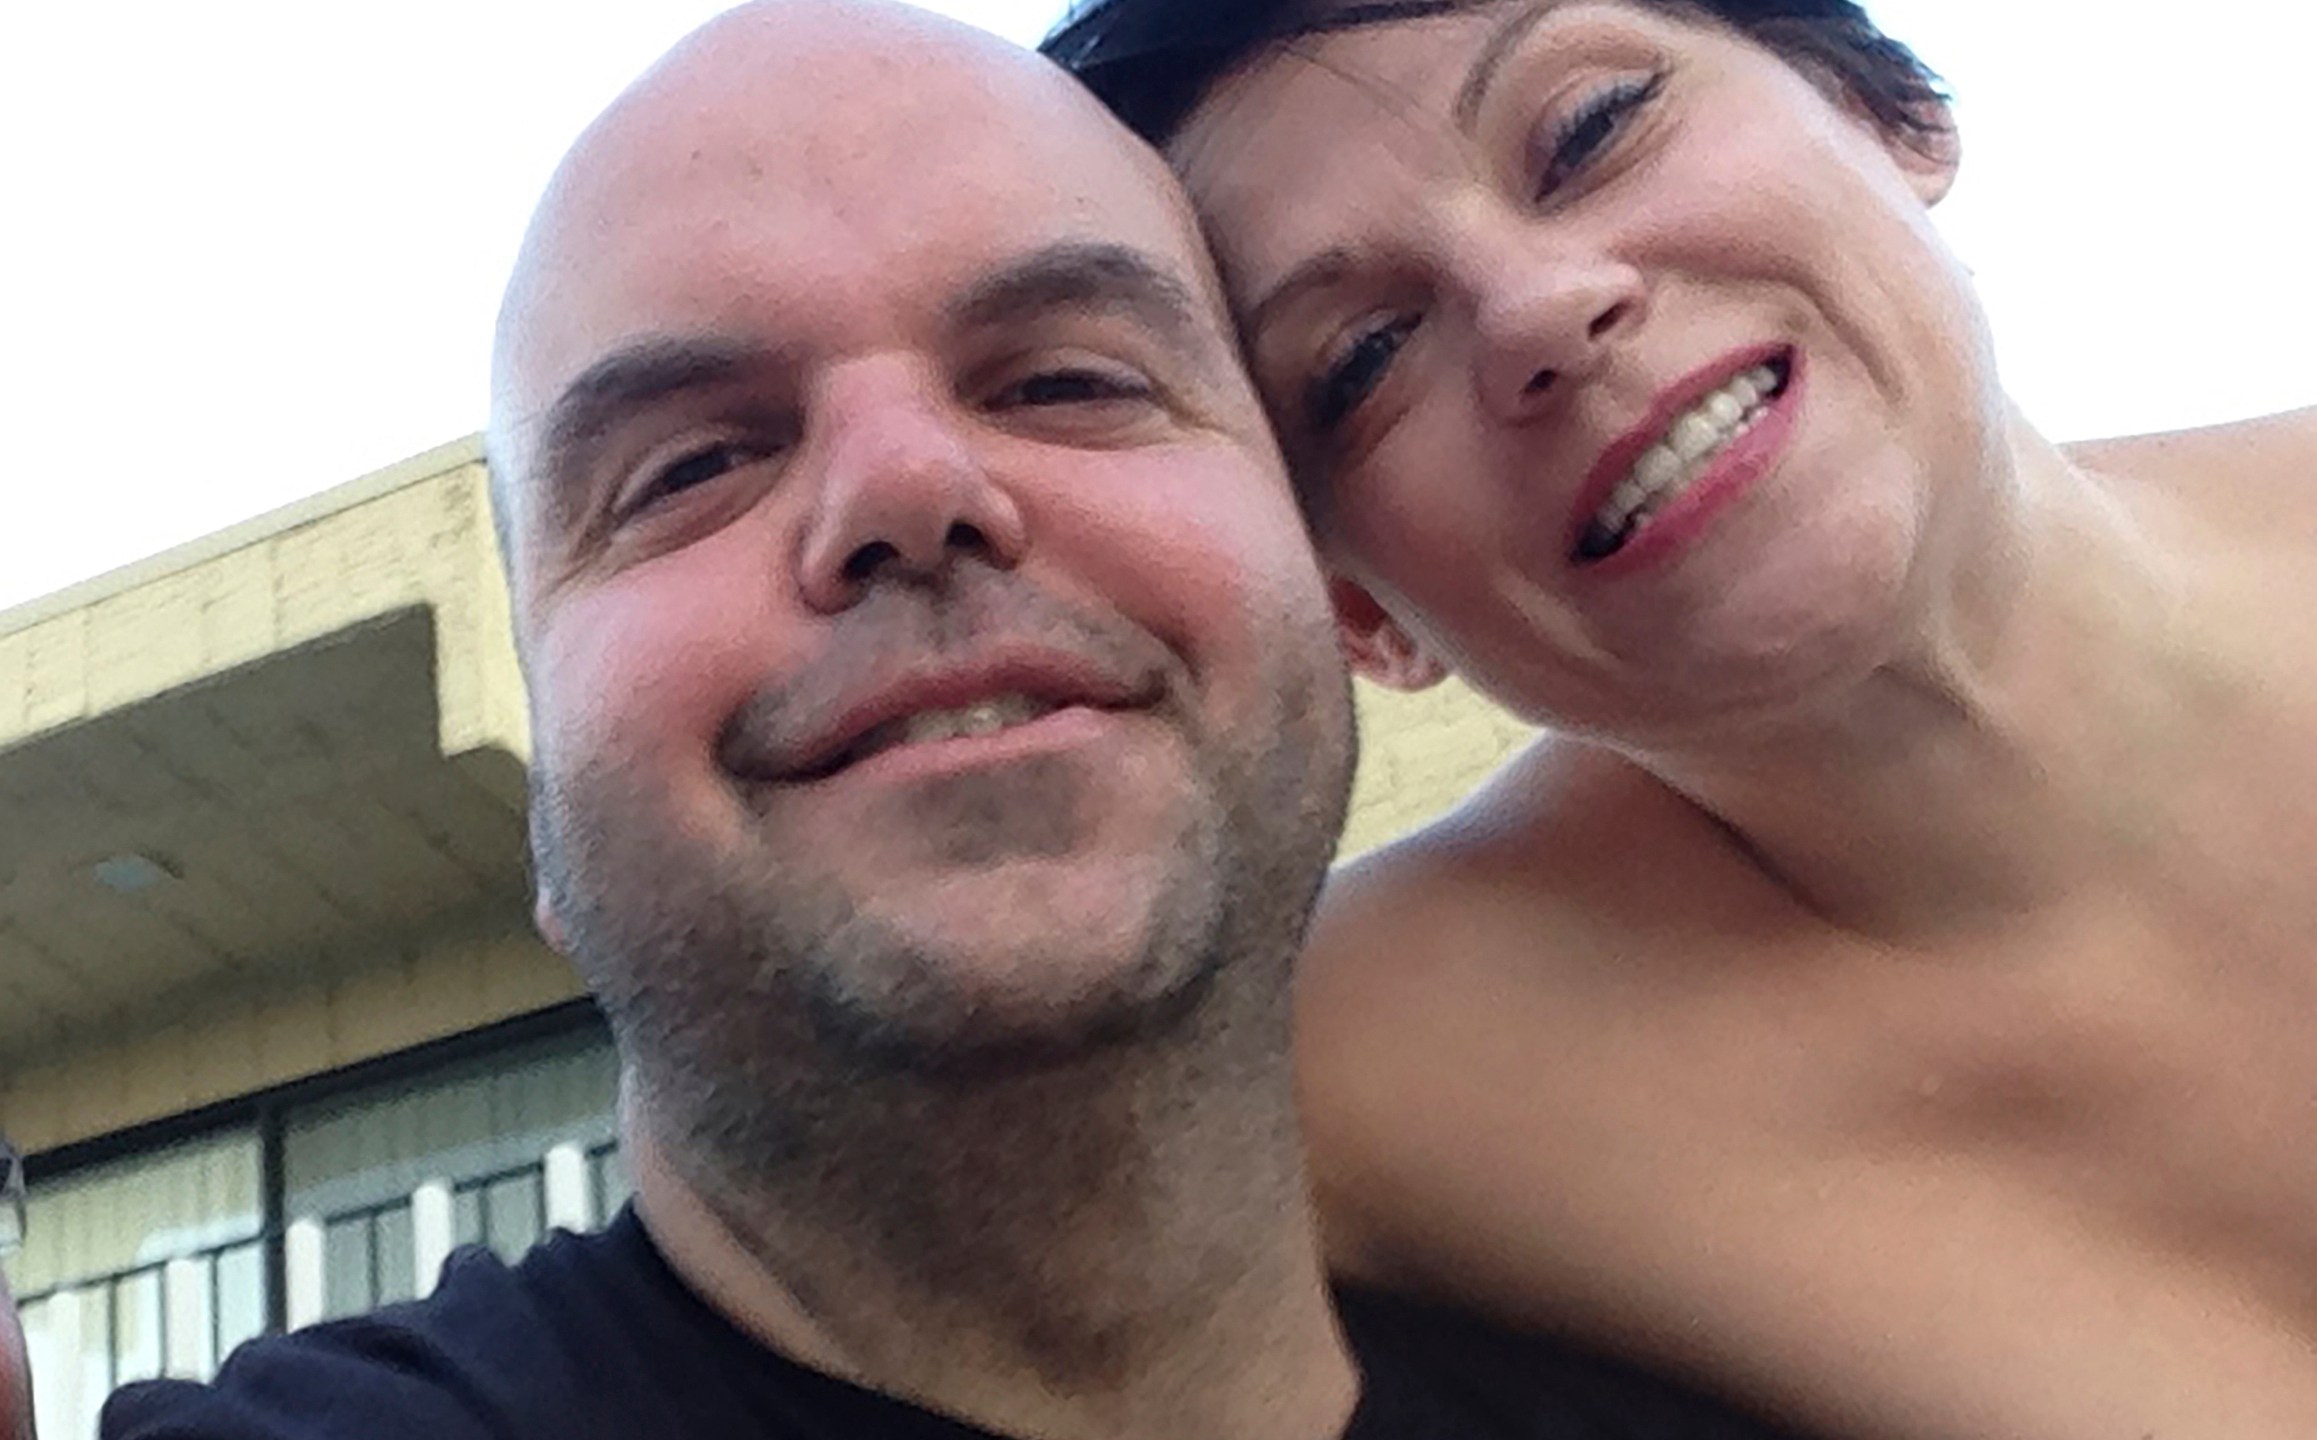 In a selfie taken in July 2014, Johnathan Walton poses with Marianne Smyth during a vacation in Palm Springs, Calif. Smyth is in a Maine jail awaiting a hearing in April 2024 that will decide whether she can be extradited to the United Kingdom over a scam dating back more than 15 years in Northern Ireland. She is accused of stealing more than $170,000 from at least five victims from 2008 to 2010 in Northern Ireland, according to court records. (Johnathan Walton via AP)